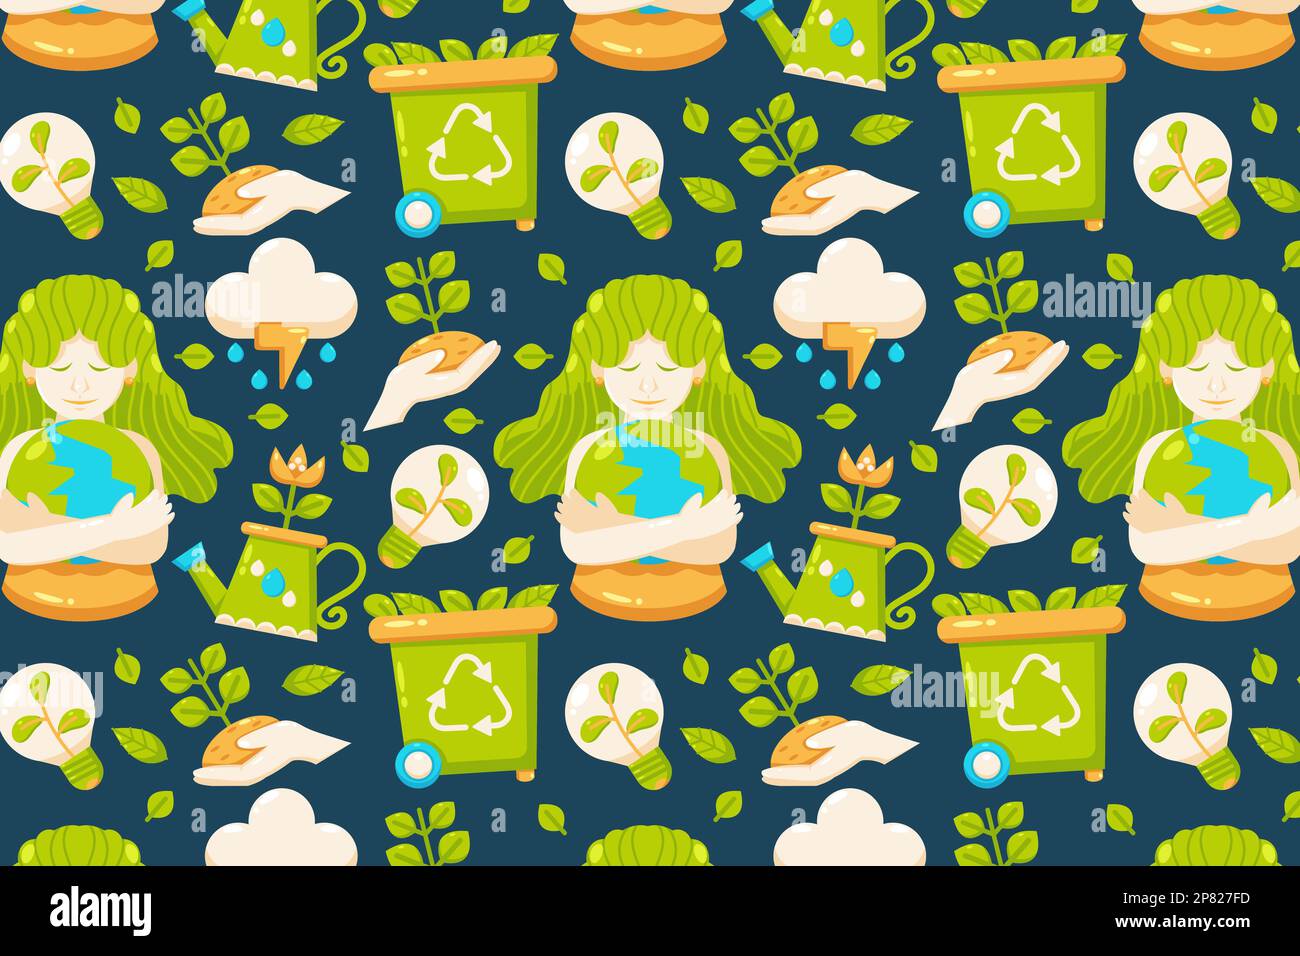 Happy Earth Day. Women hugging the earth, watering plants, lights, rain, and trash can patterns Stock Vector